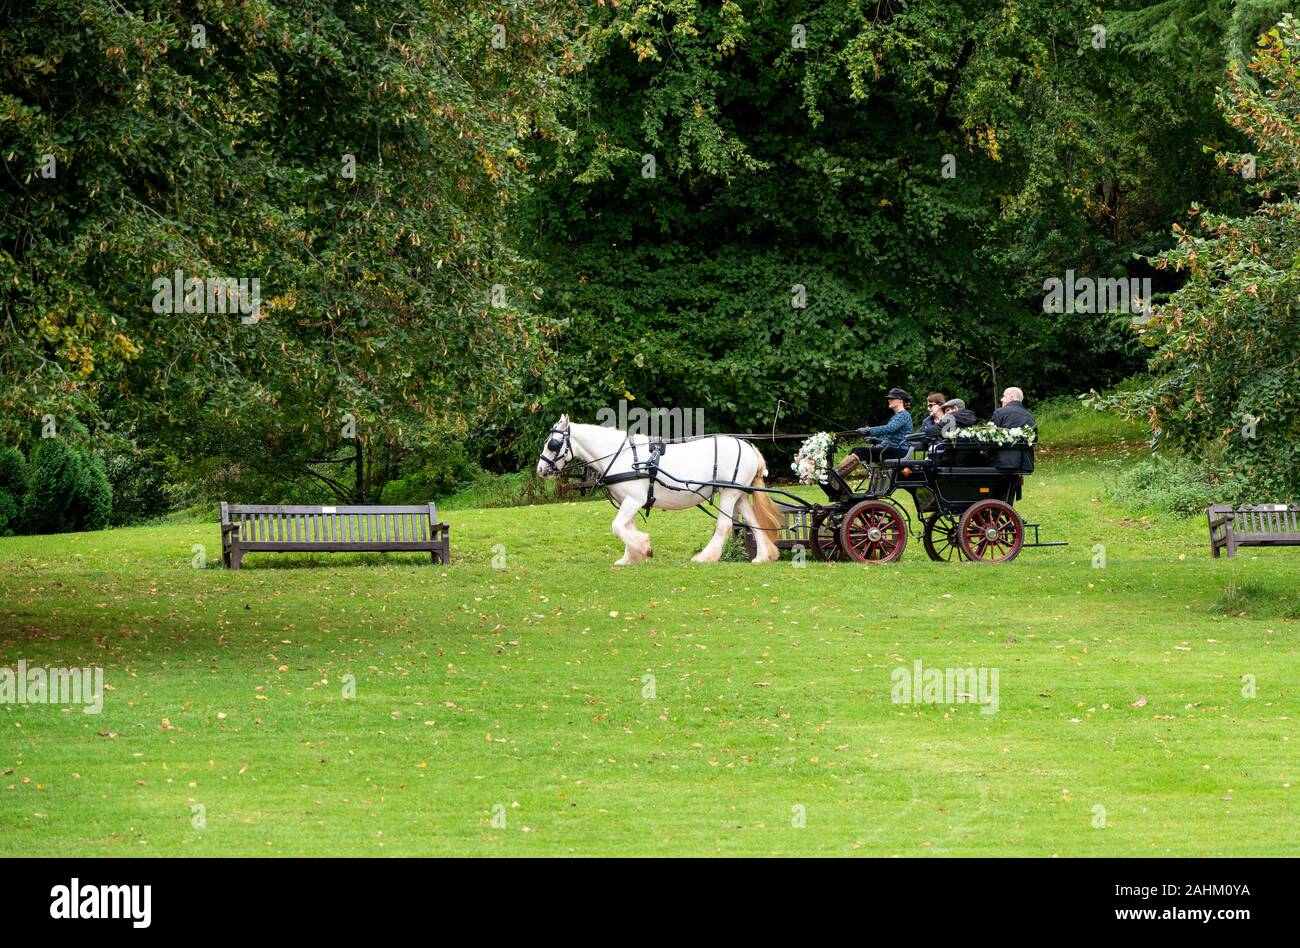 Torquay, UK - 28 September 2019: Tourists take a horse and carriage ride in Cockington Country park Stock Photo